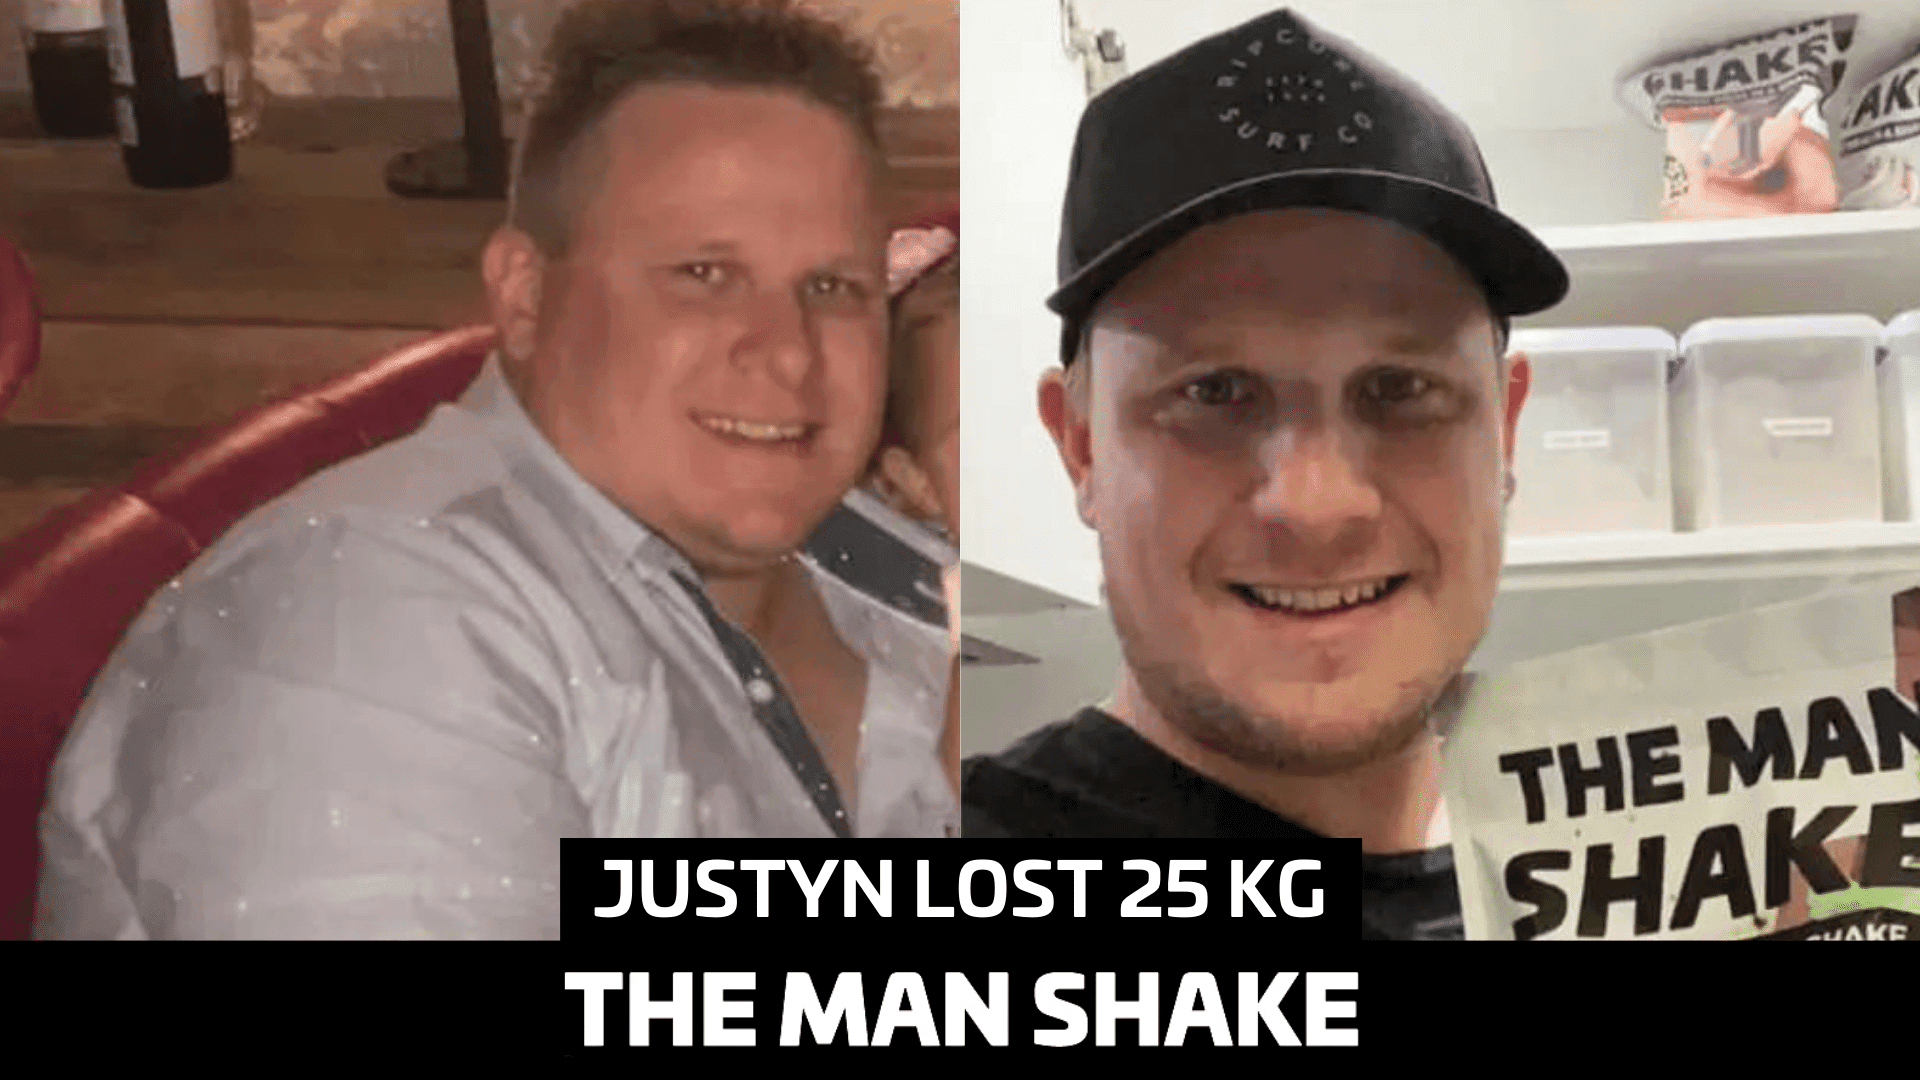 Justyn lost 25kg for his family.